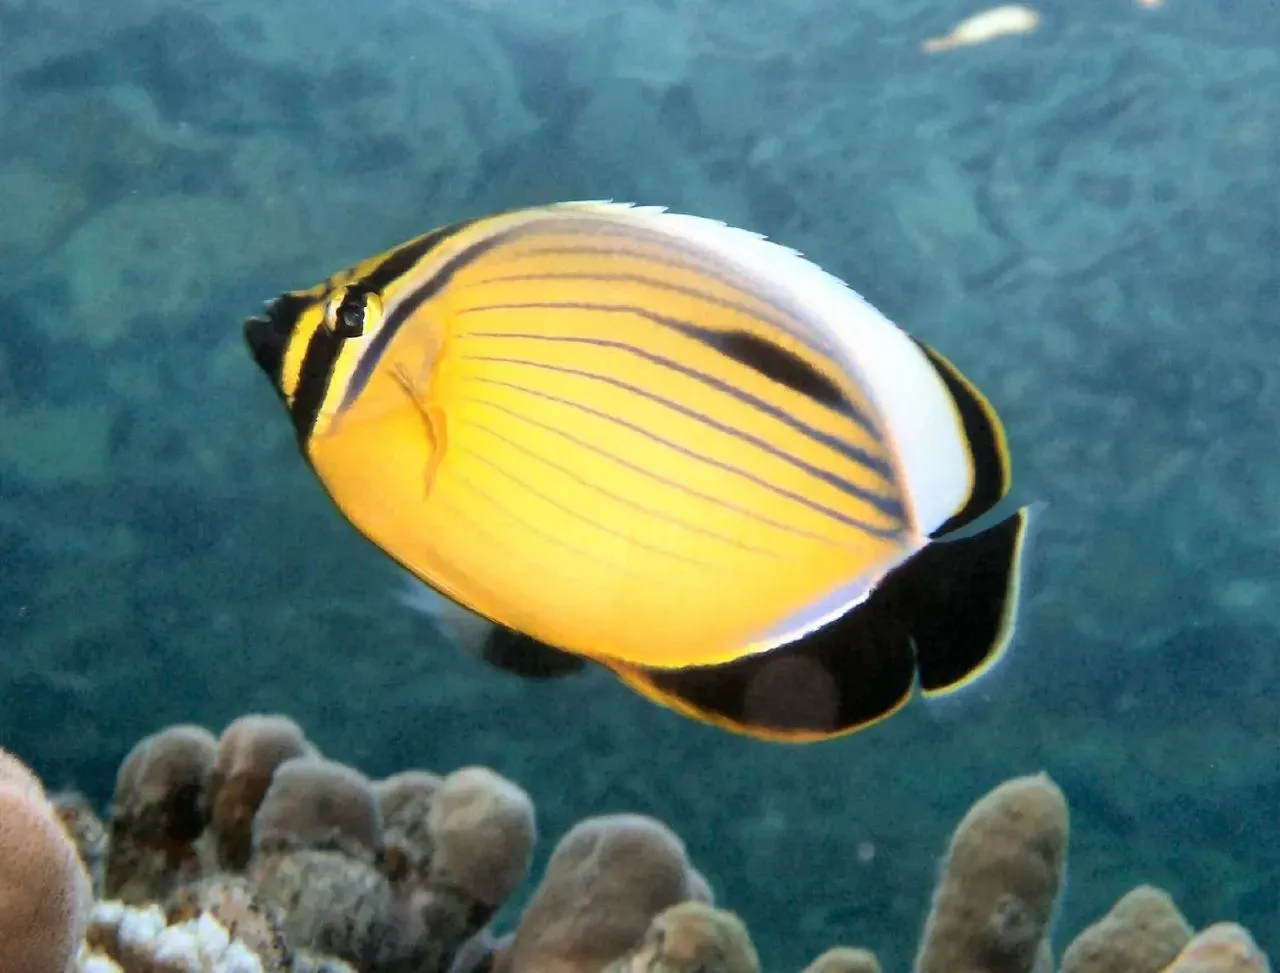 Auriga butterflyfishes are hardy fishes and diseases in a well-maintained aquarium are minimal.